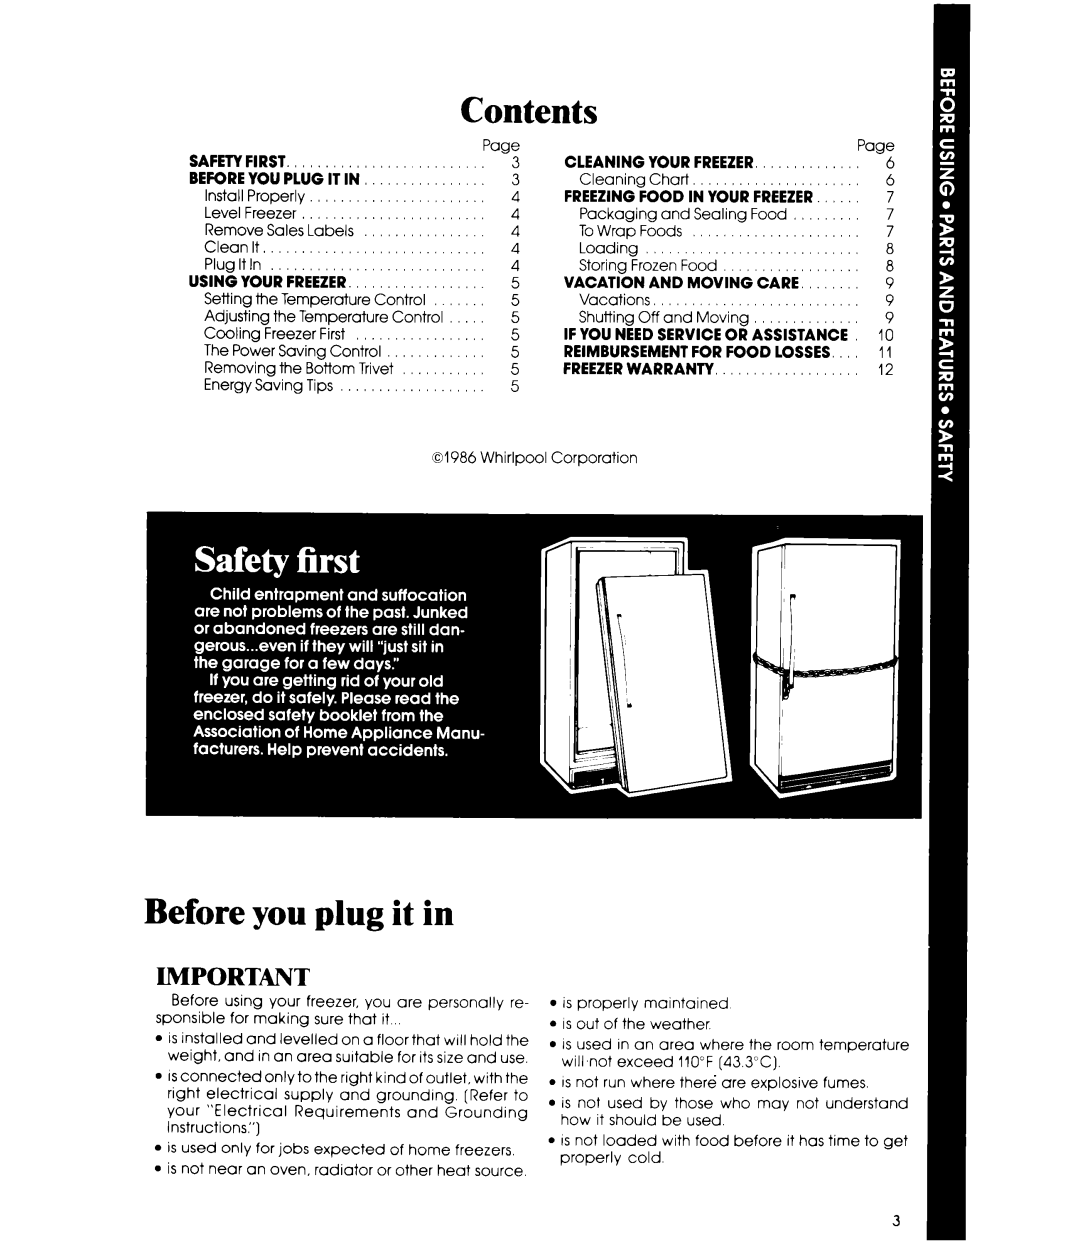 Whirlpool EV130 E manual Contents, Before you plug it in, Cleaning Your Freezer, Vacation And Moving Care 